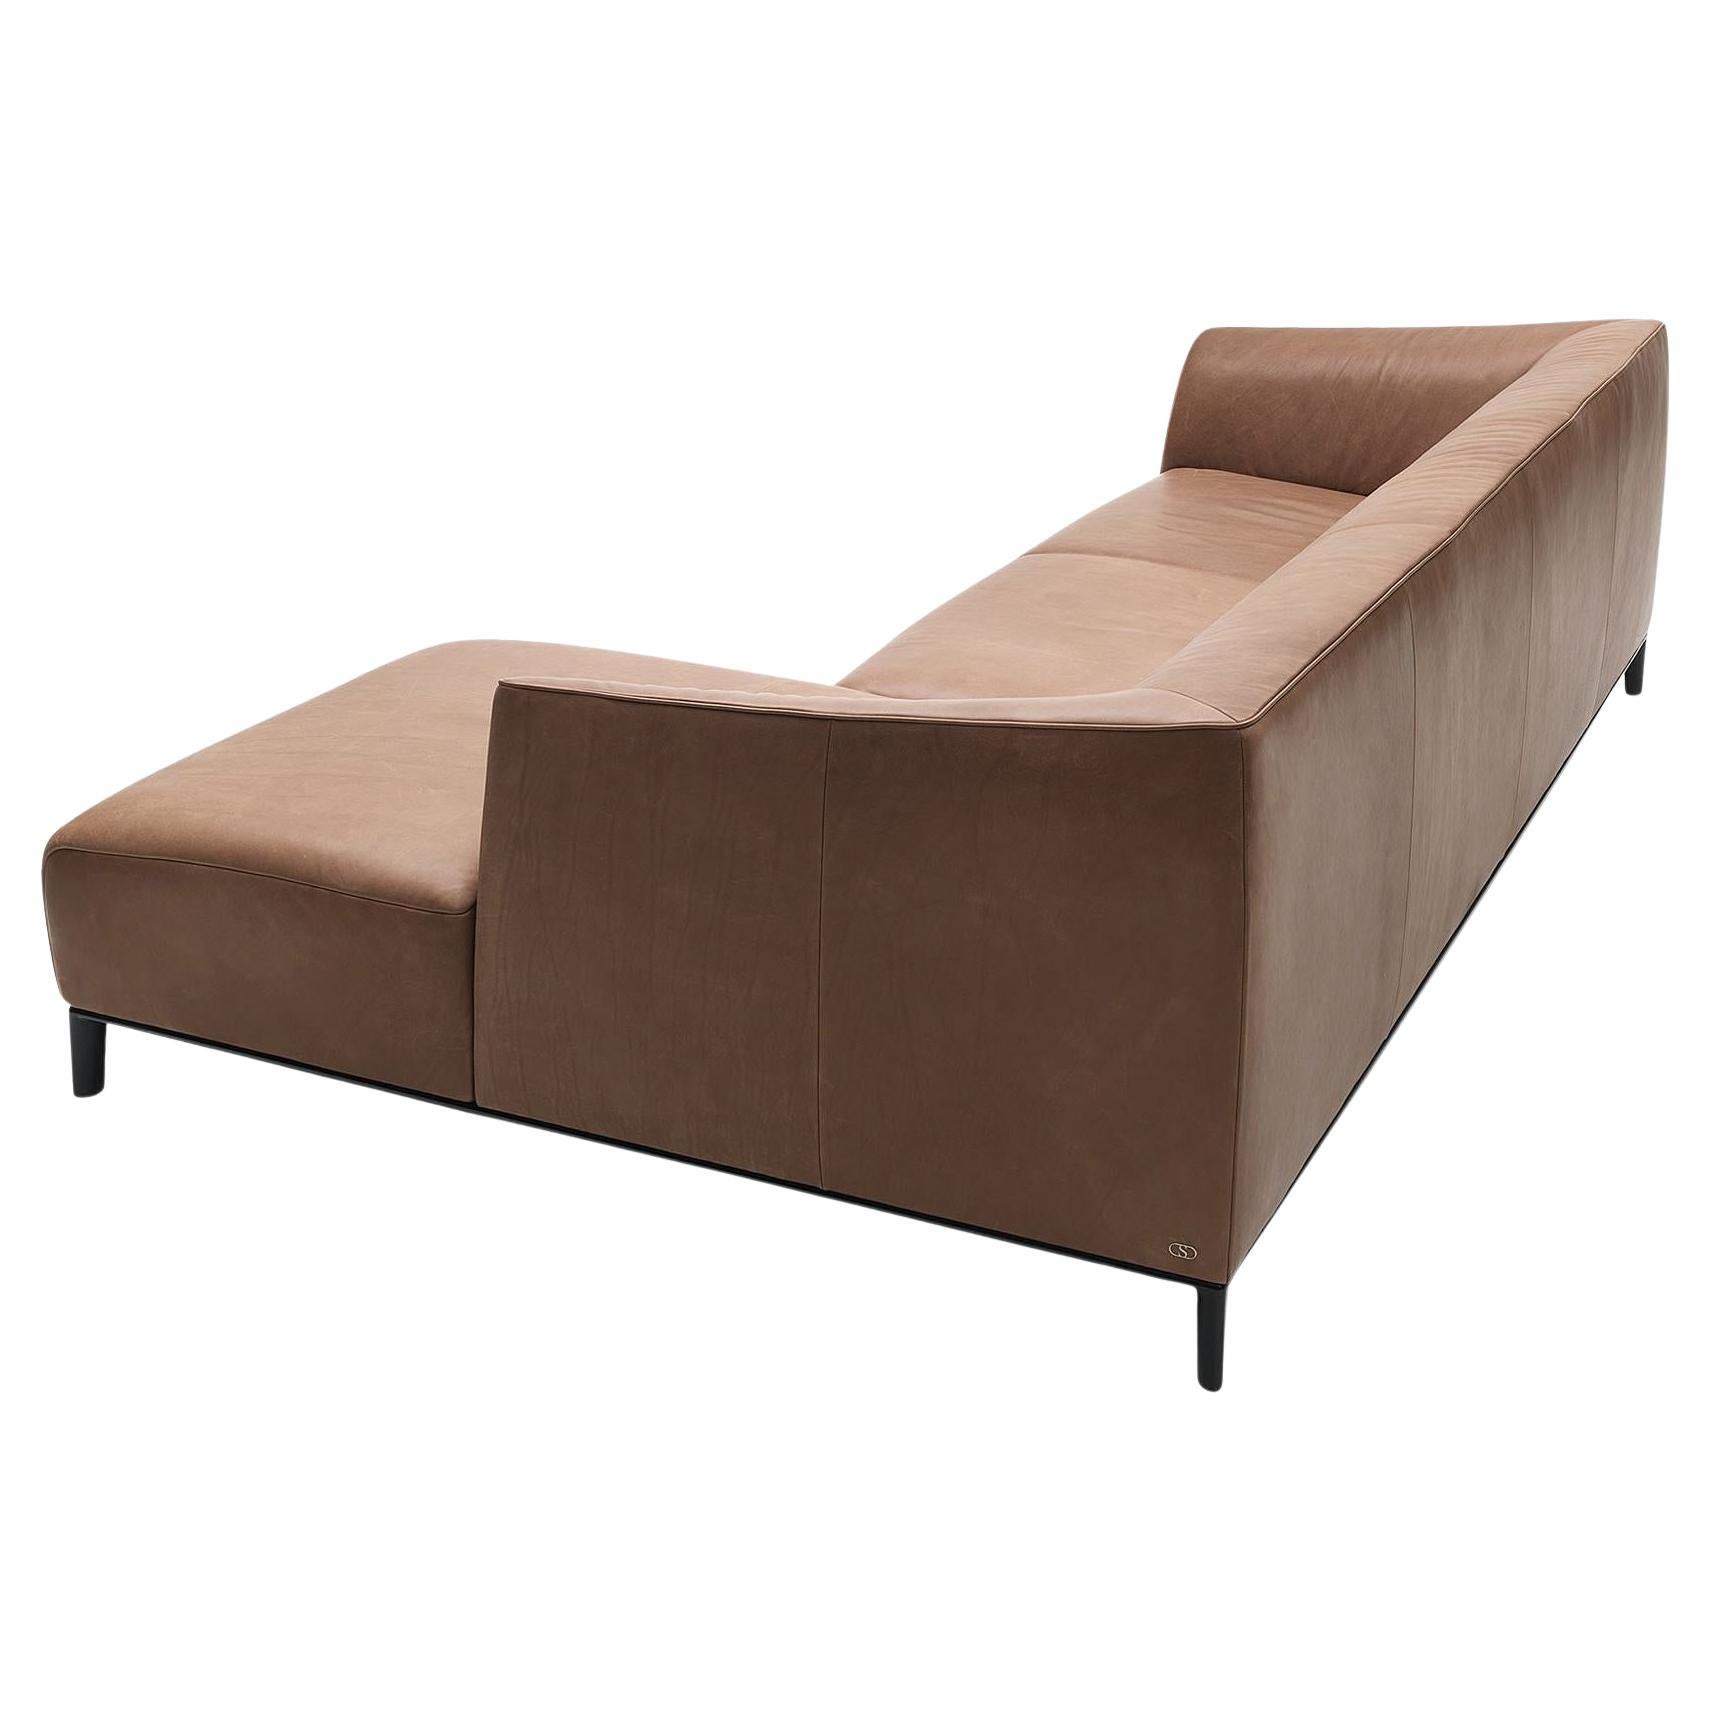 De Sede DS-276/260 Modular Sofa in Natural Wot Upholstery by Christian Werner